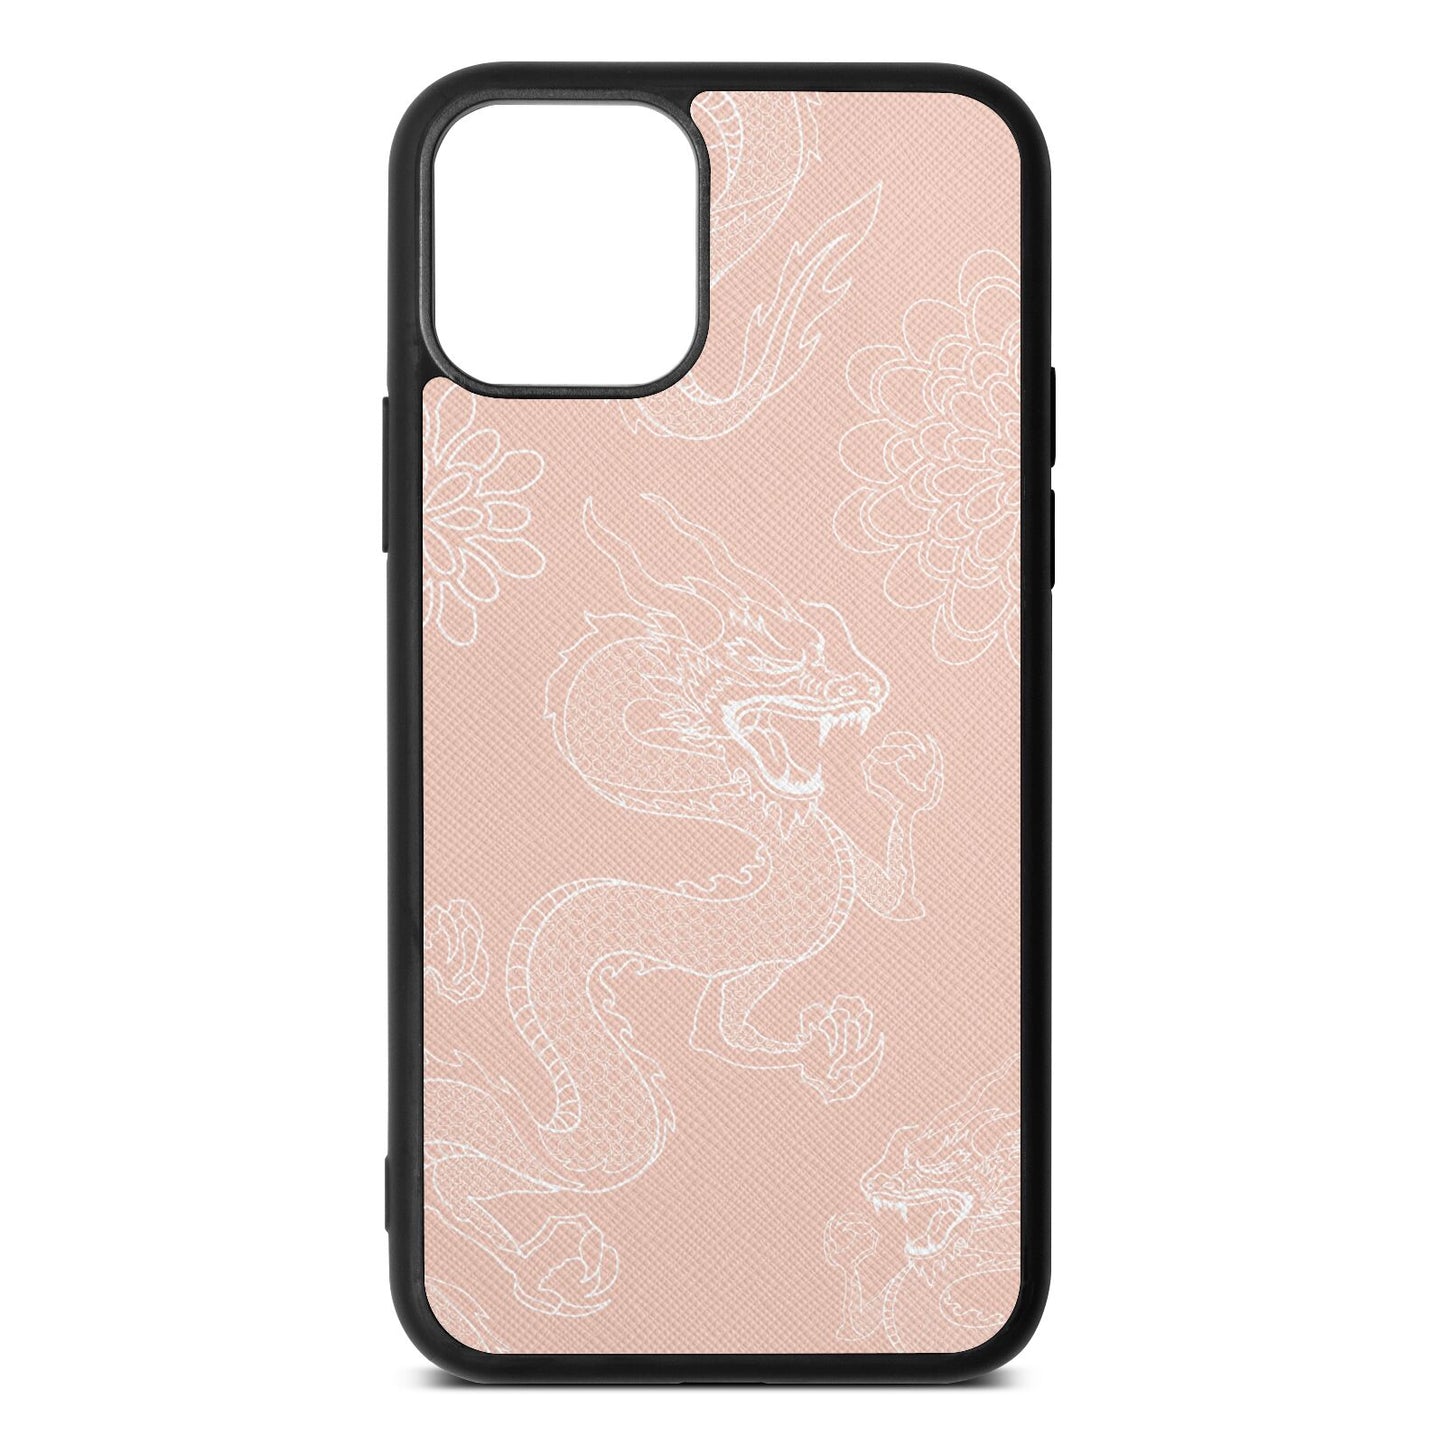 Dragons Nude Saffiano Leather iPhone 11 Case